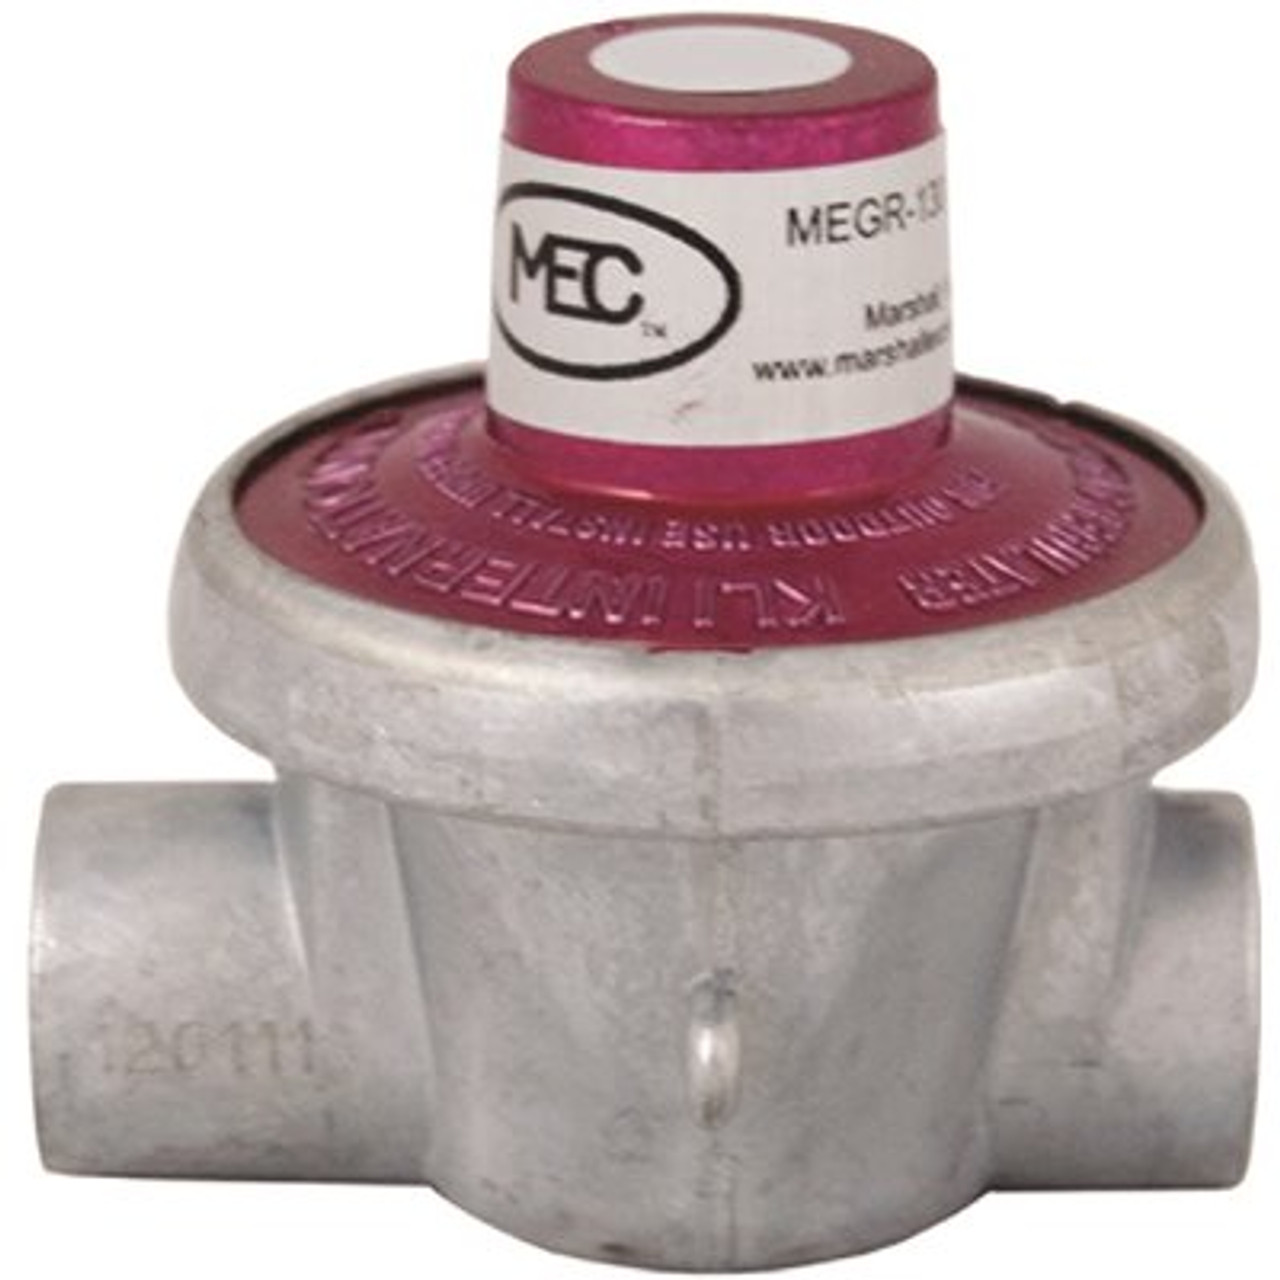 MEC Fixed High Pressure Compact Regulator 10 PSI 1/4 in. FNPT Inlet and Outlet